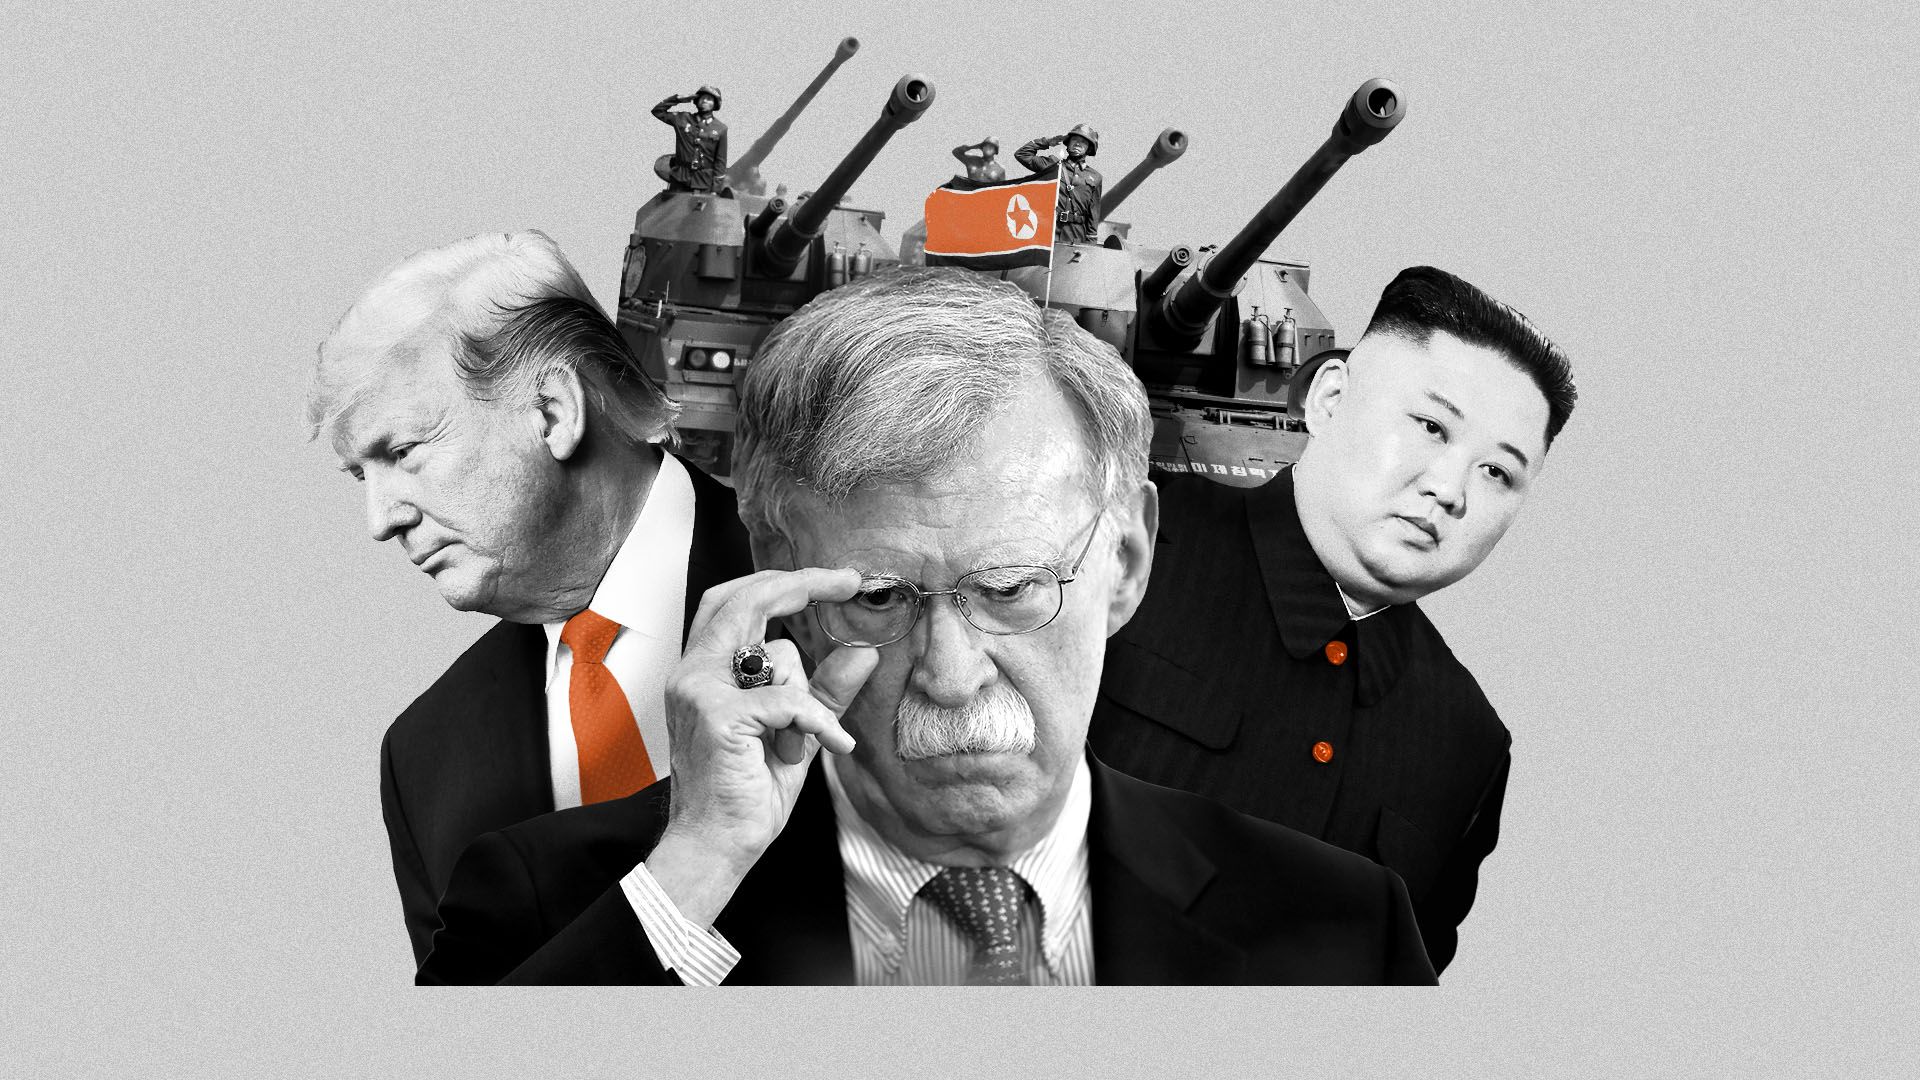 Photo illustration of John Bolton, President Trump, Kim Jong Un, and a collection of tanks from a North Korean military parade